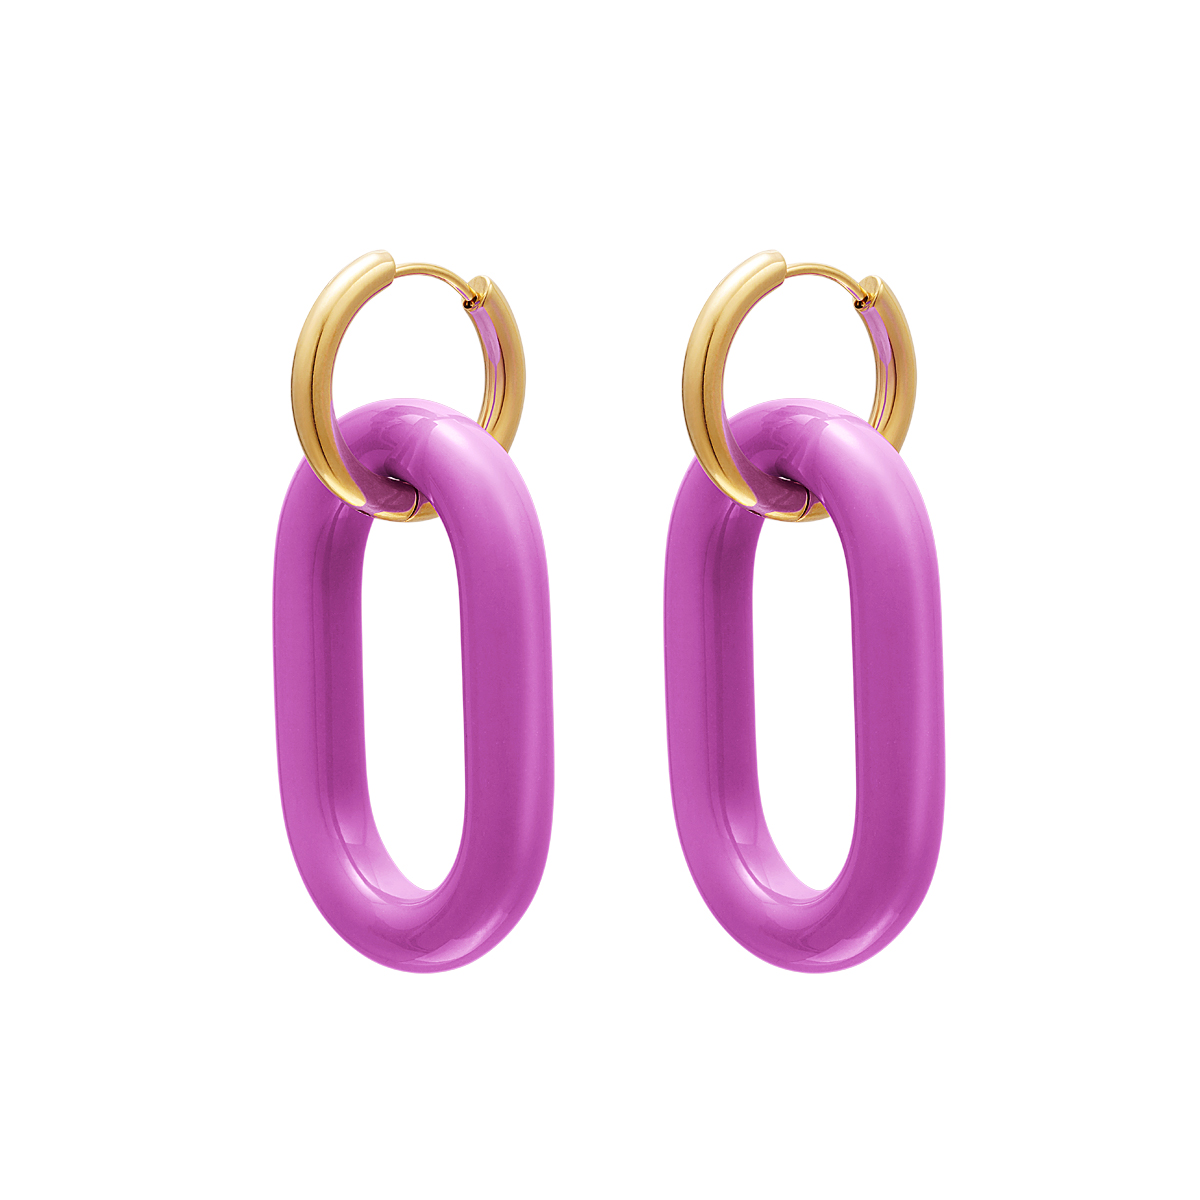 Colourful anchor link earrings - #summergirls collection